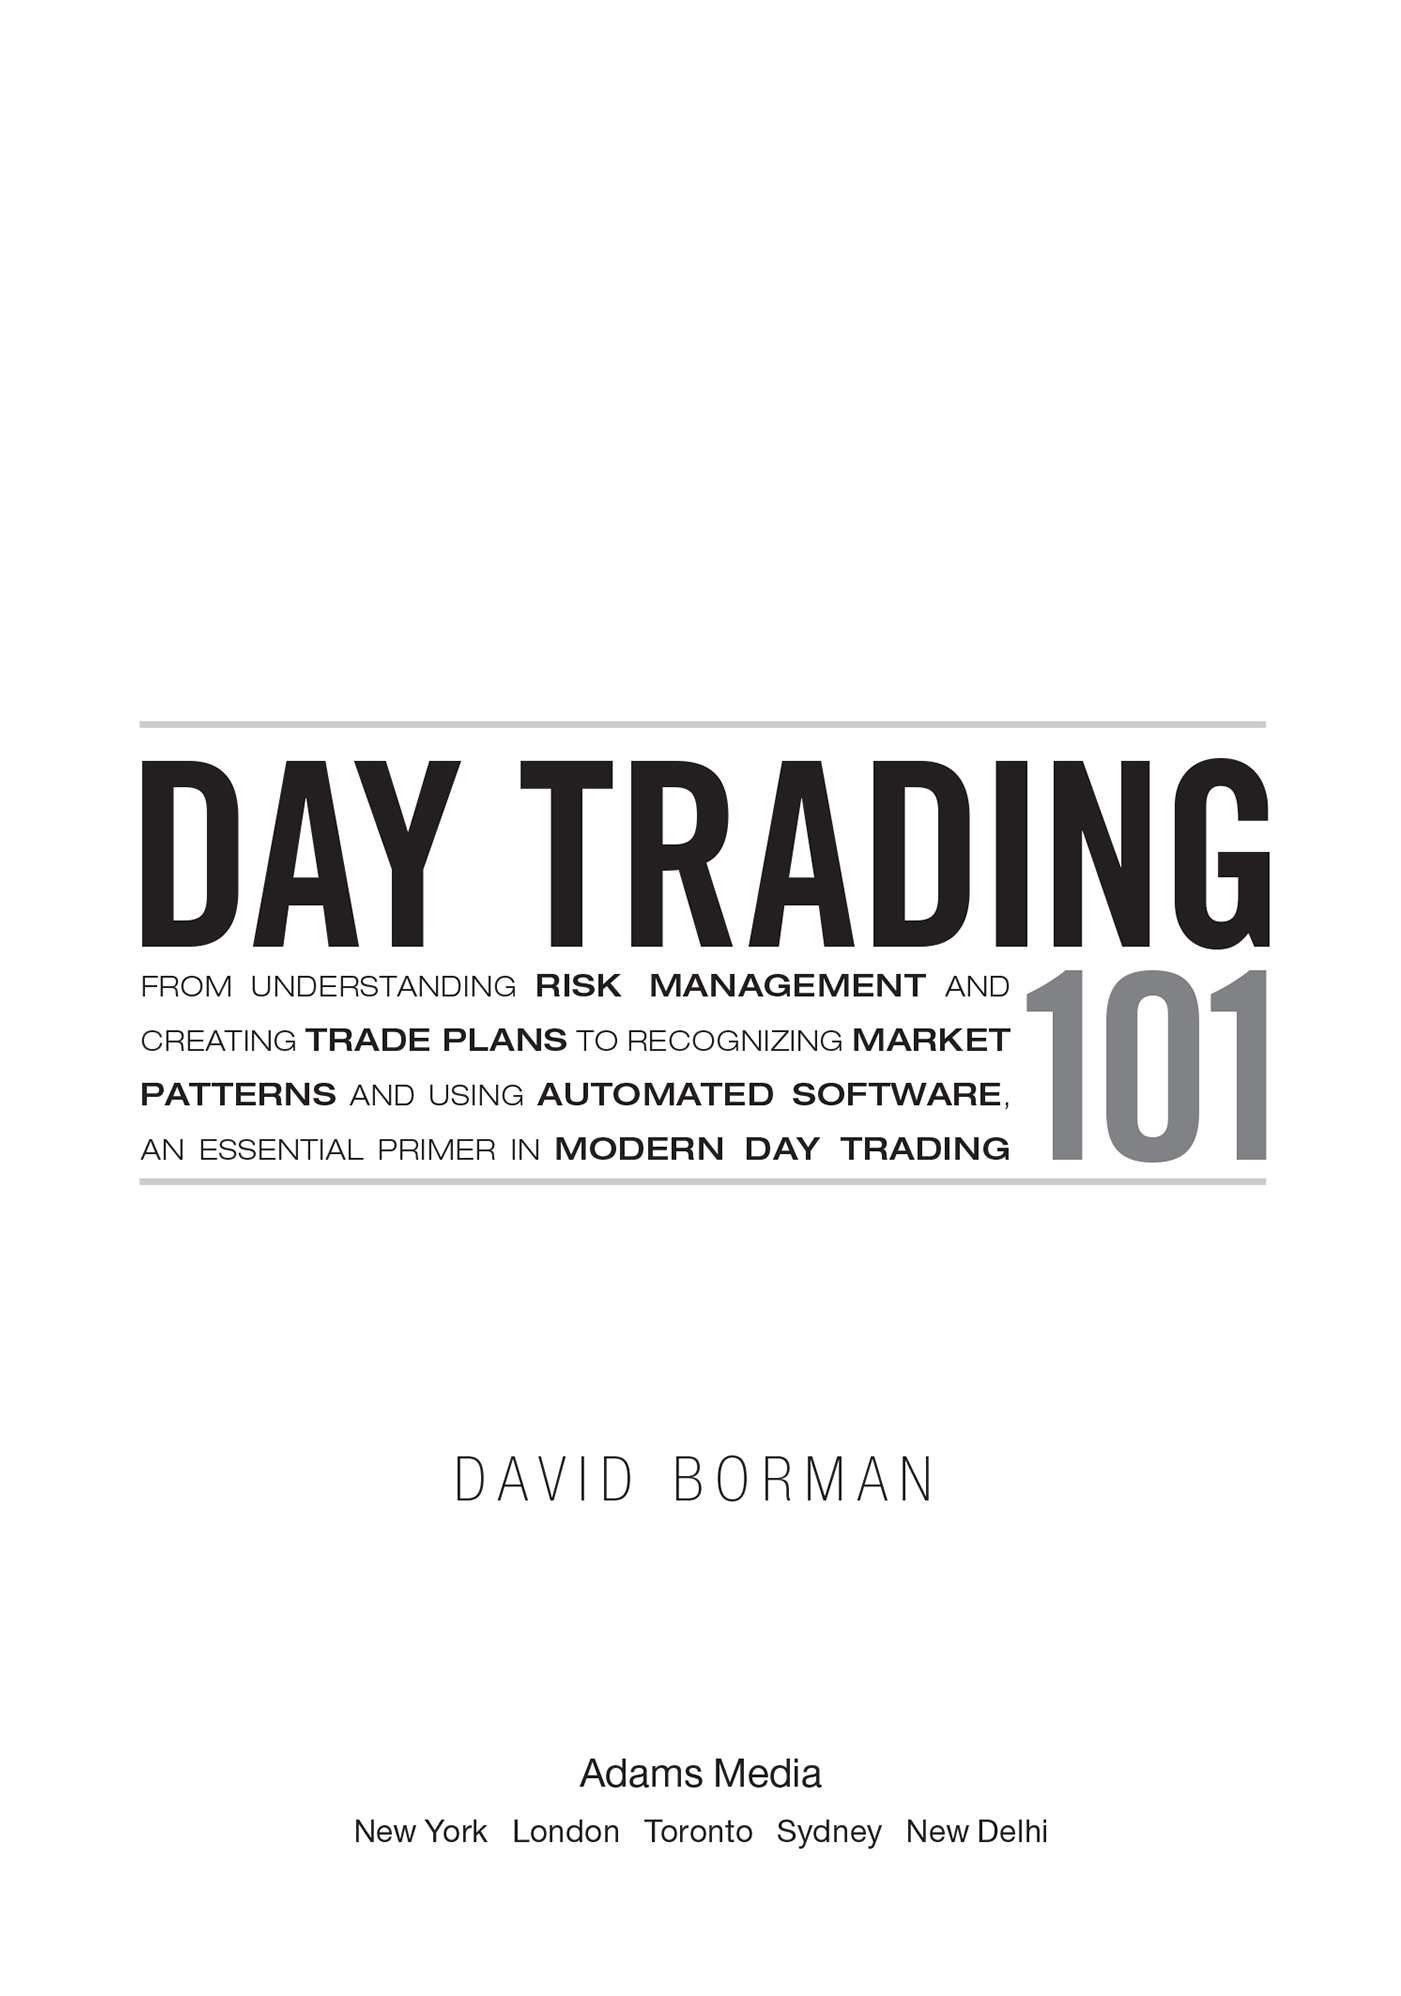 Day trading 101 from understanding risk management and creating trade plans to recognizing market patterns and using automated software an essential primer in modern day trading - image 2